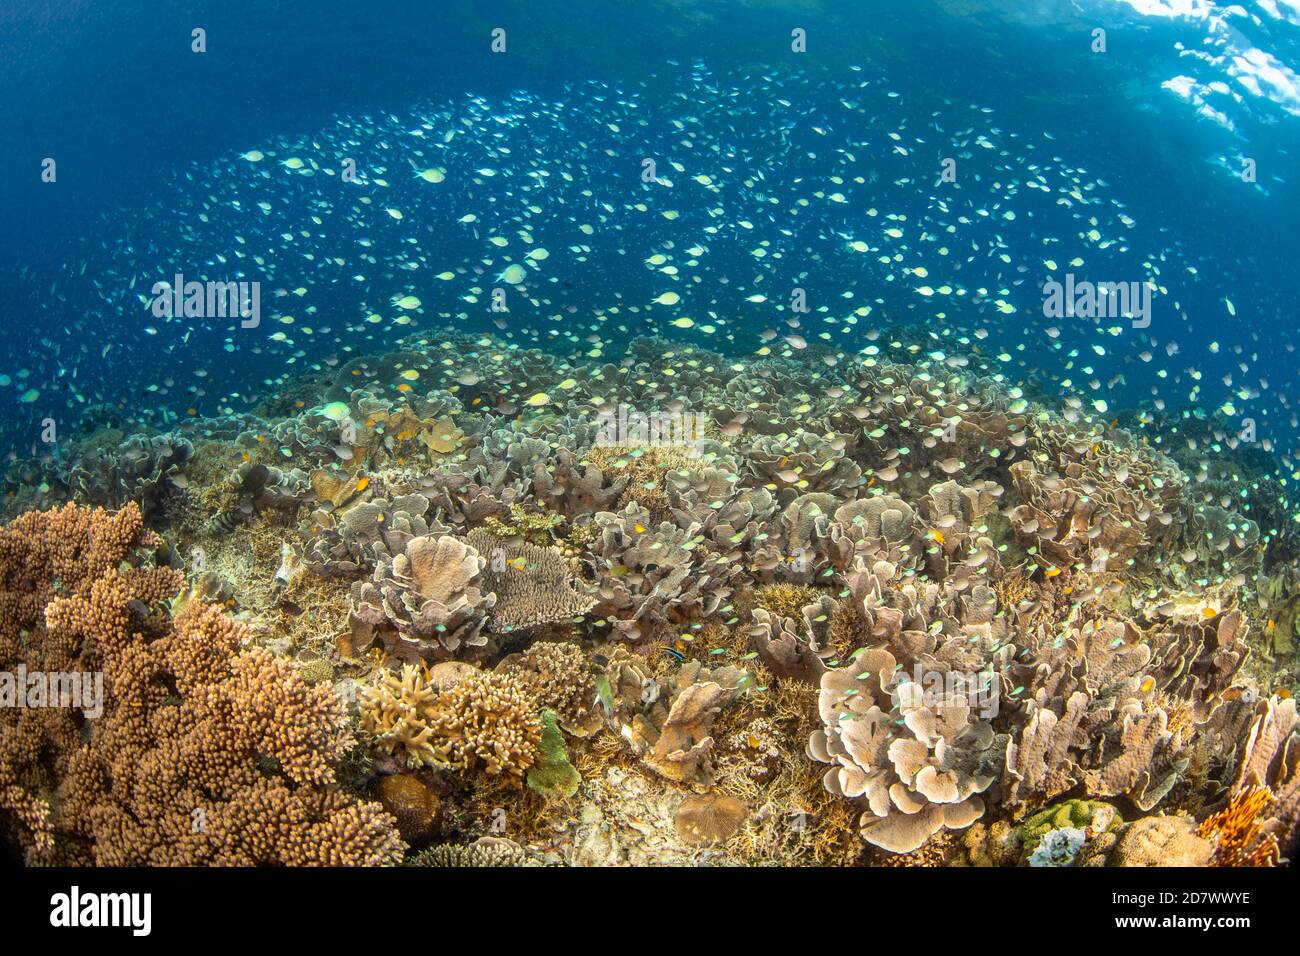 Vast hard corals and schooling chromis and damsels dominate this Philippine reef scene fed by morsels passing in the current. Stock Photo